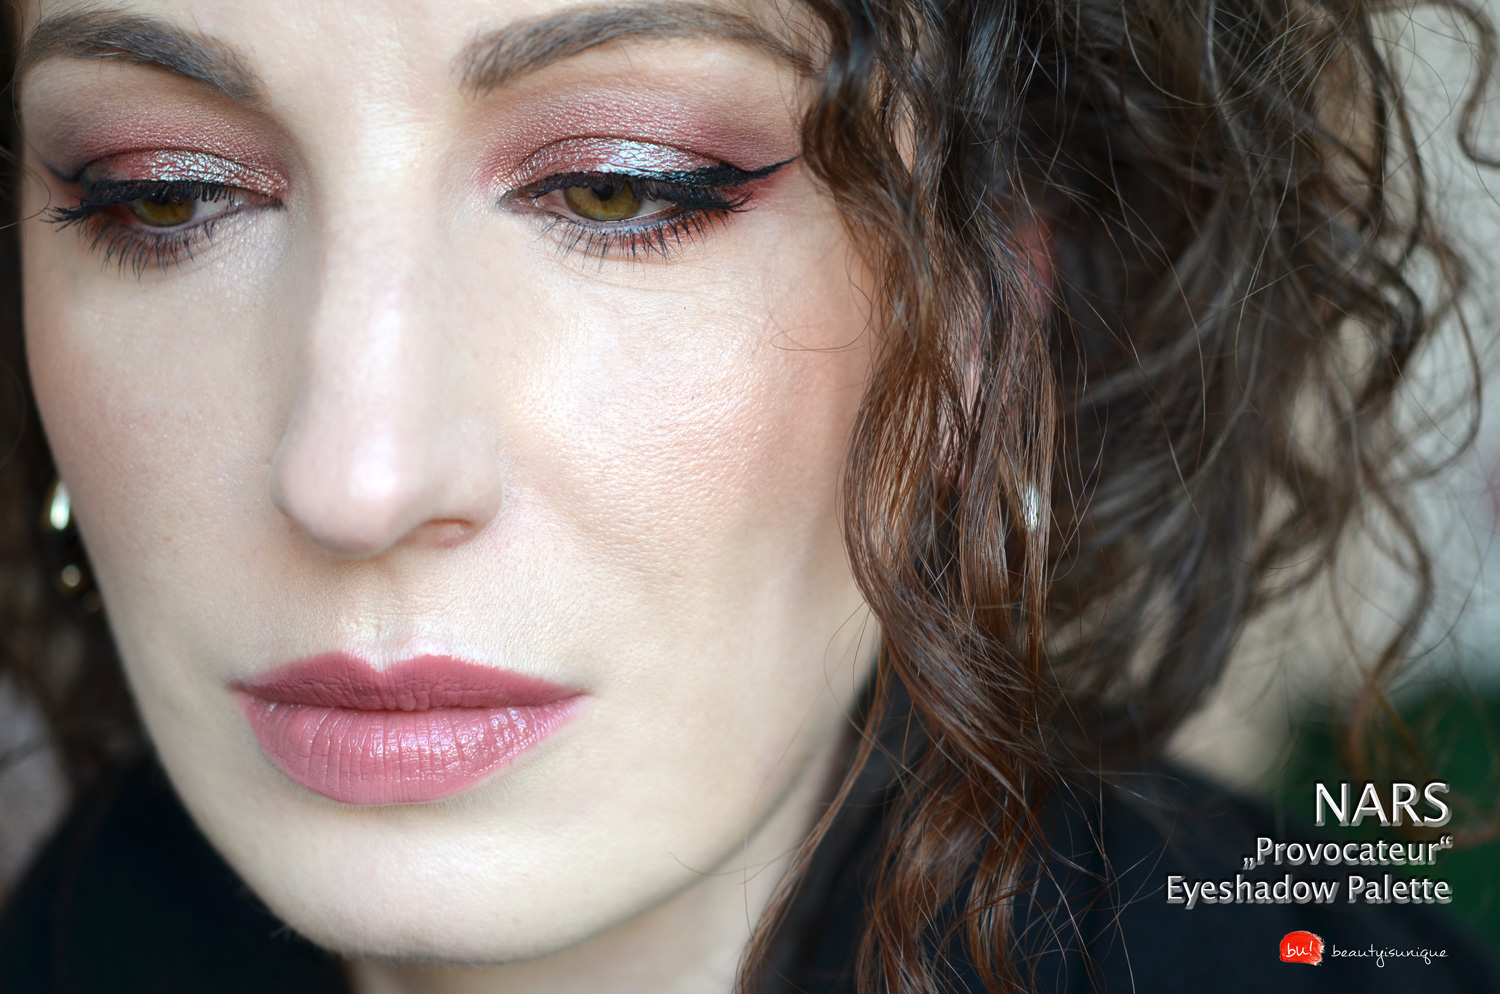 nars-provocateur-eyeshadow-palete-preview